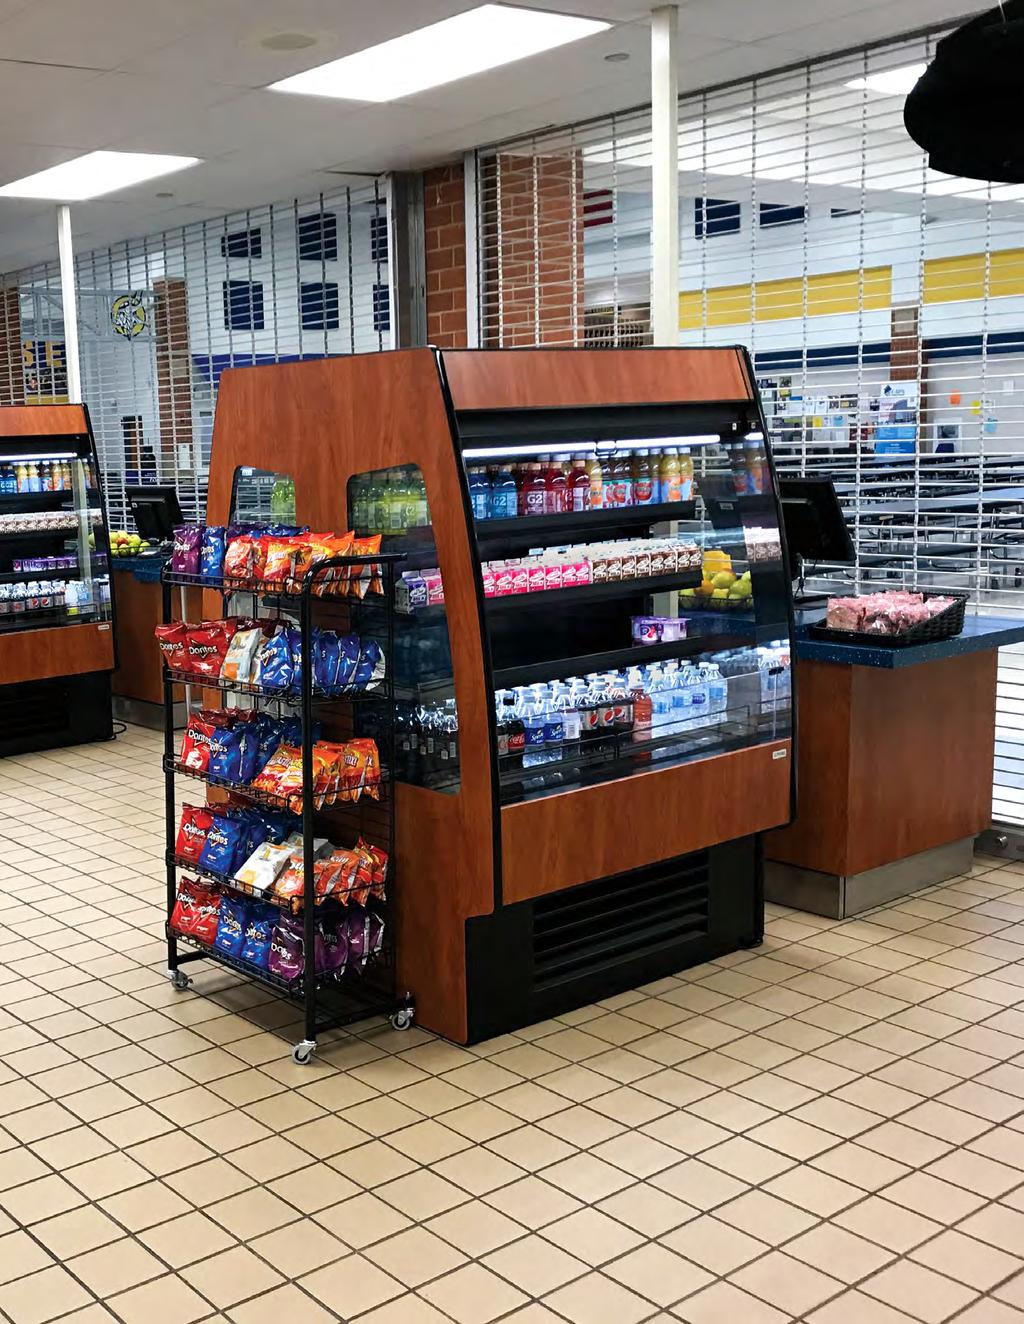 Model Shown: Oasis FSC463R Dual-Sided Refrigerated Self-Service (see p.